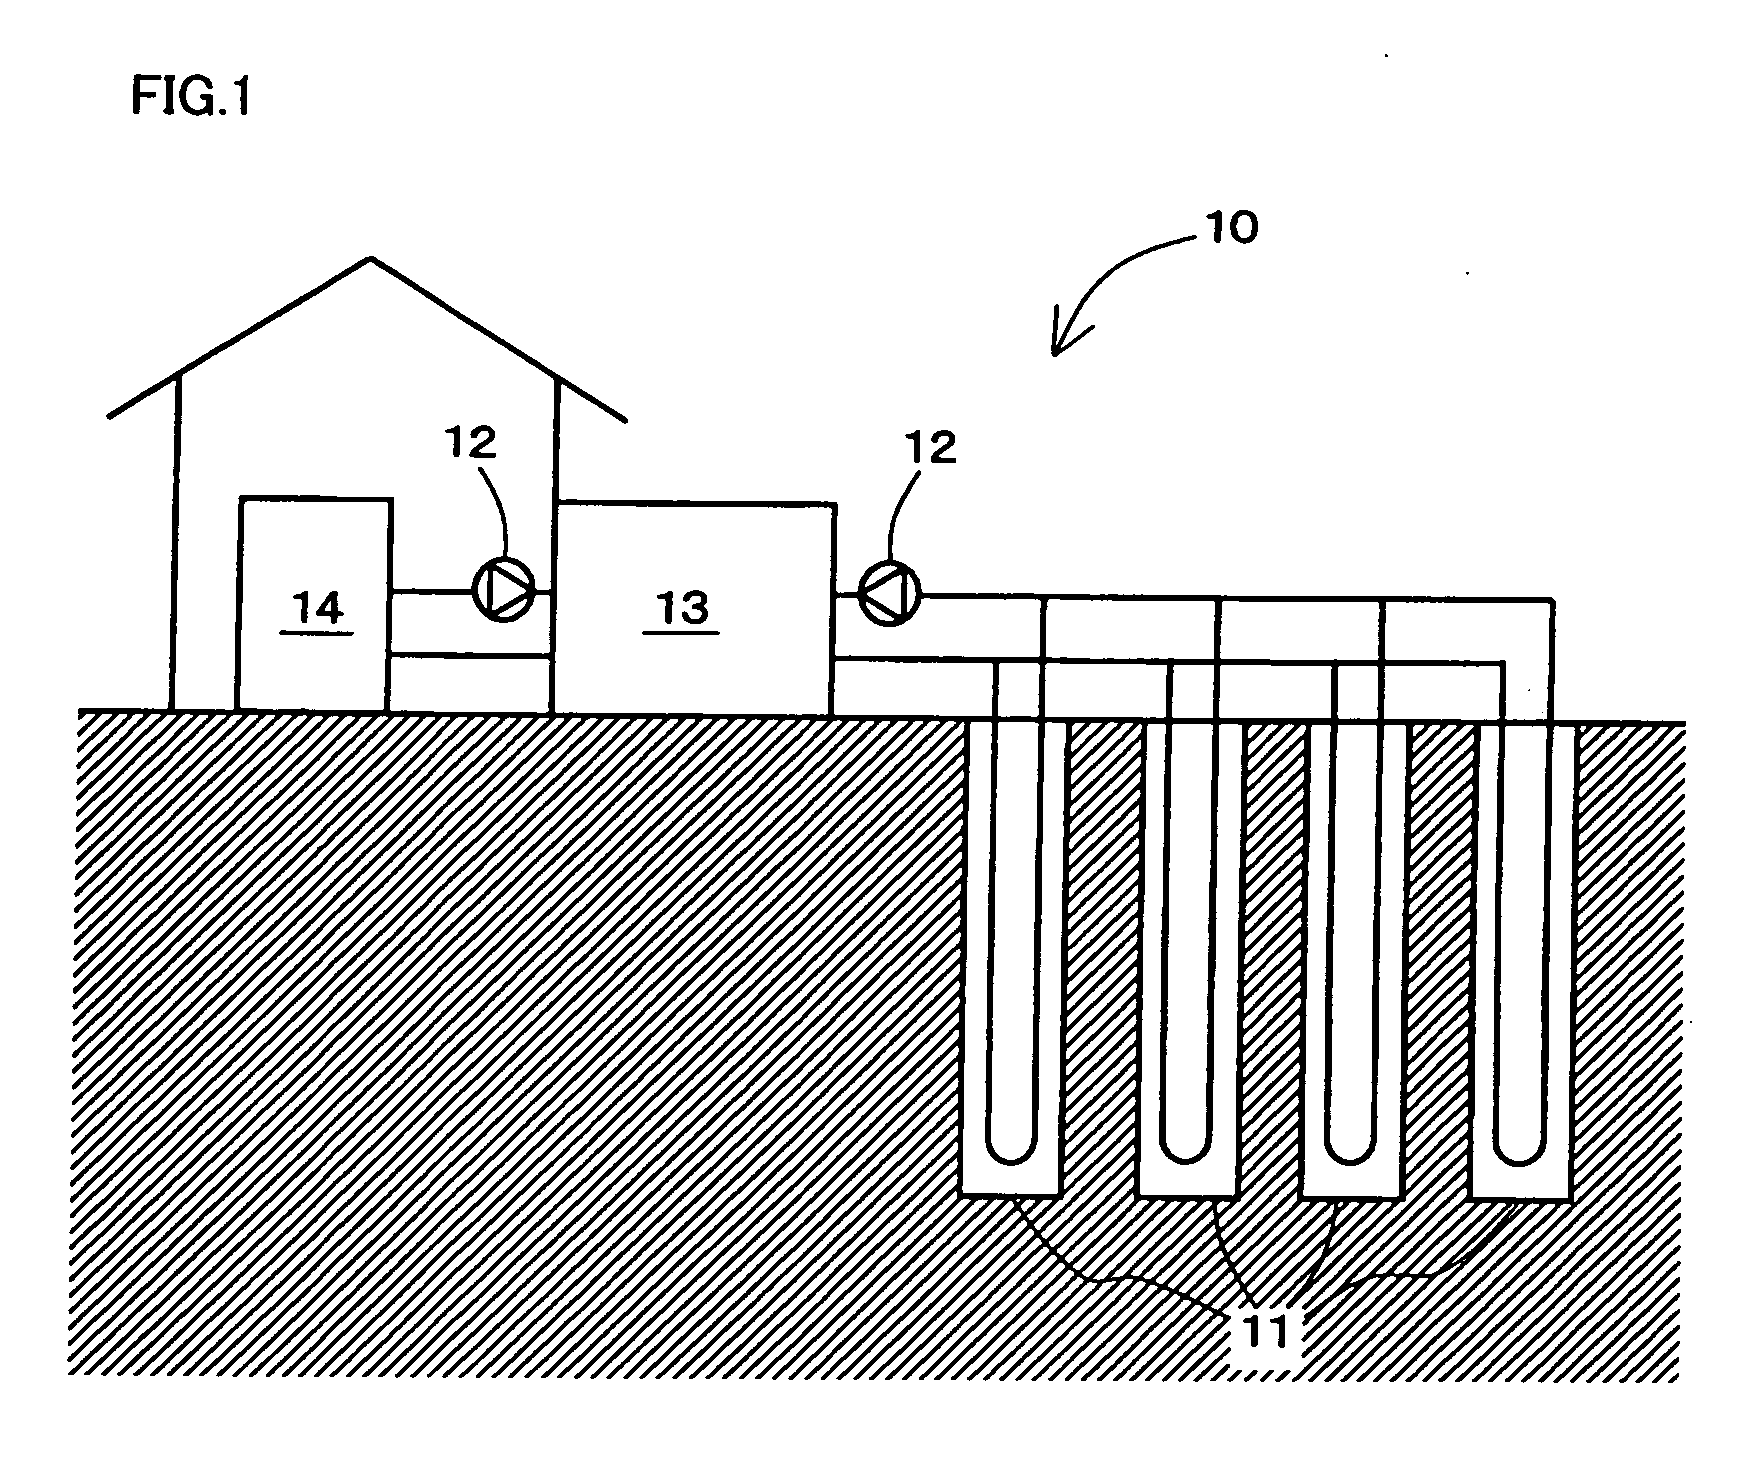 Performance prediction program and performance prediction system for ground source heat pump system